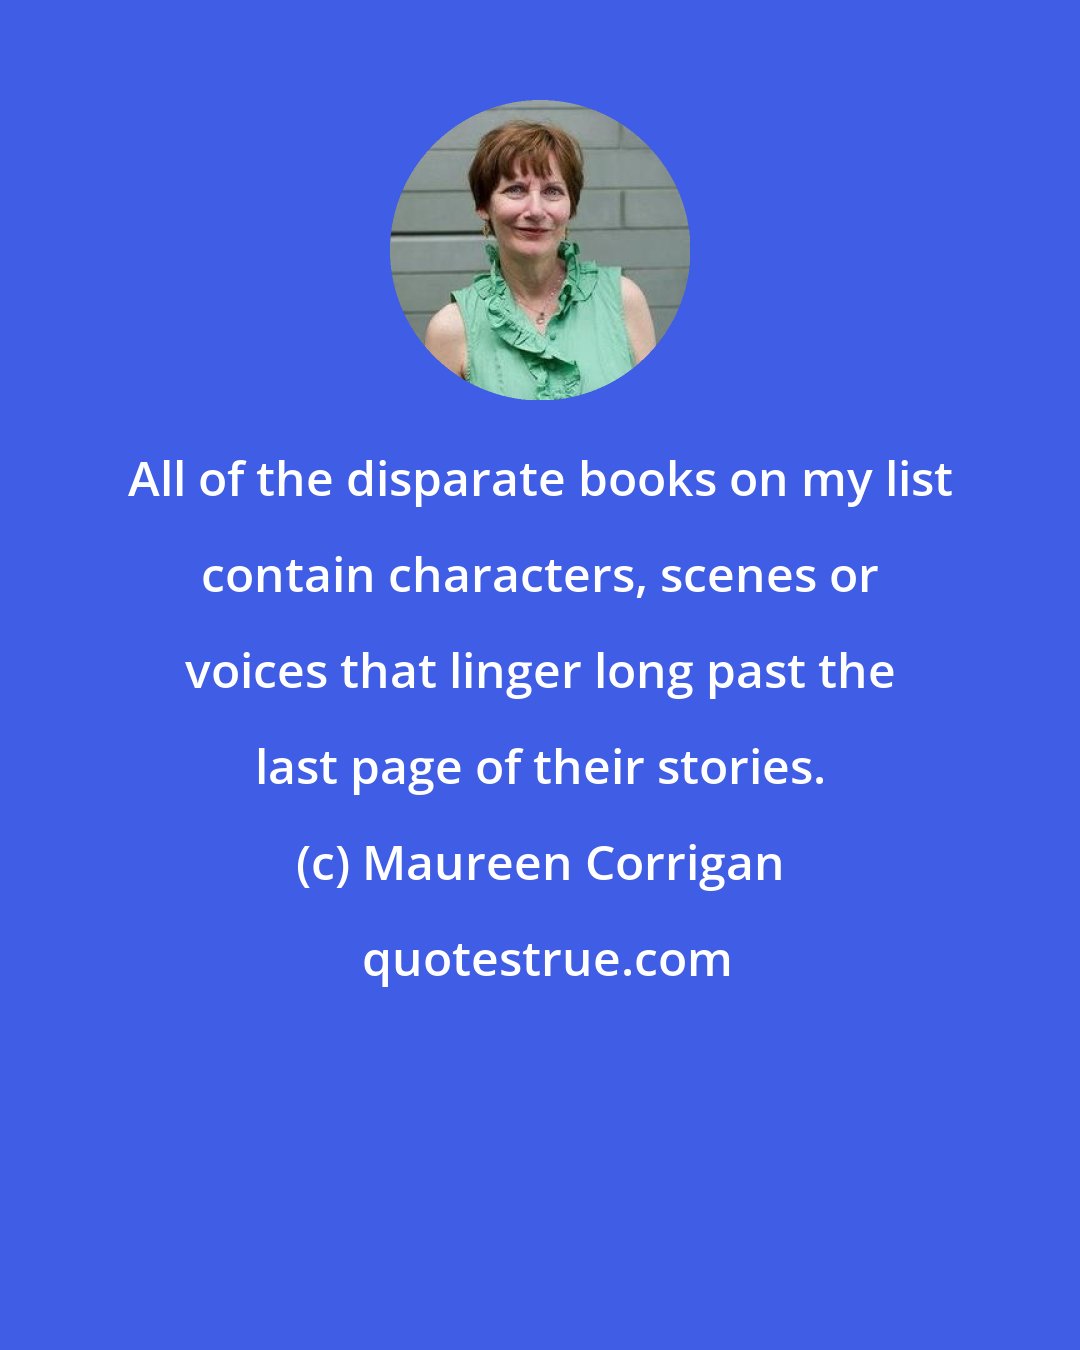 Maureen Corrigan: All of the disparate books on my list contain characters, scenes or voices that linger long past the last page of their stories.